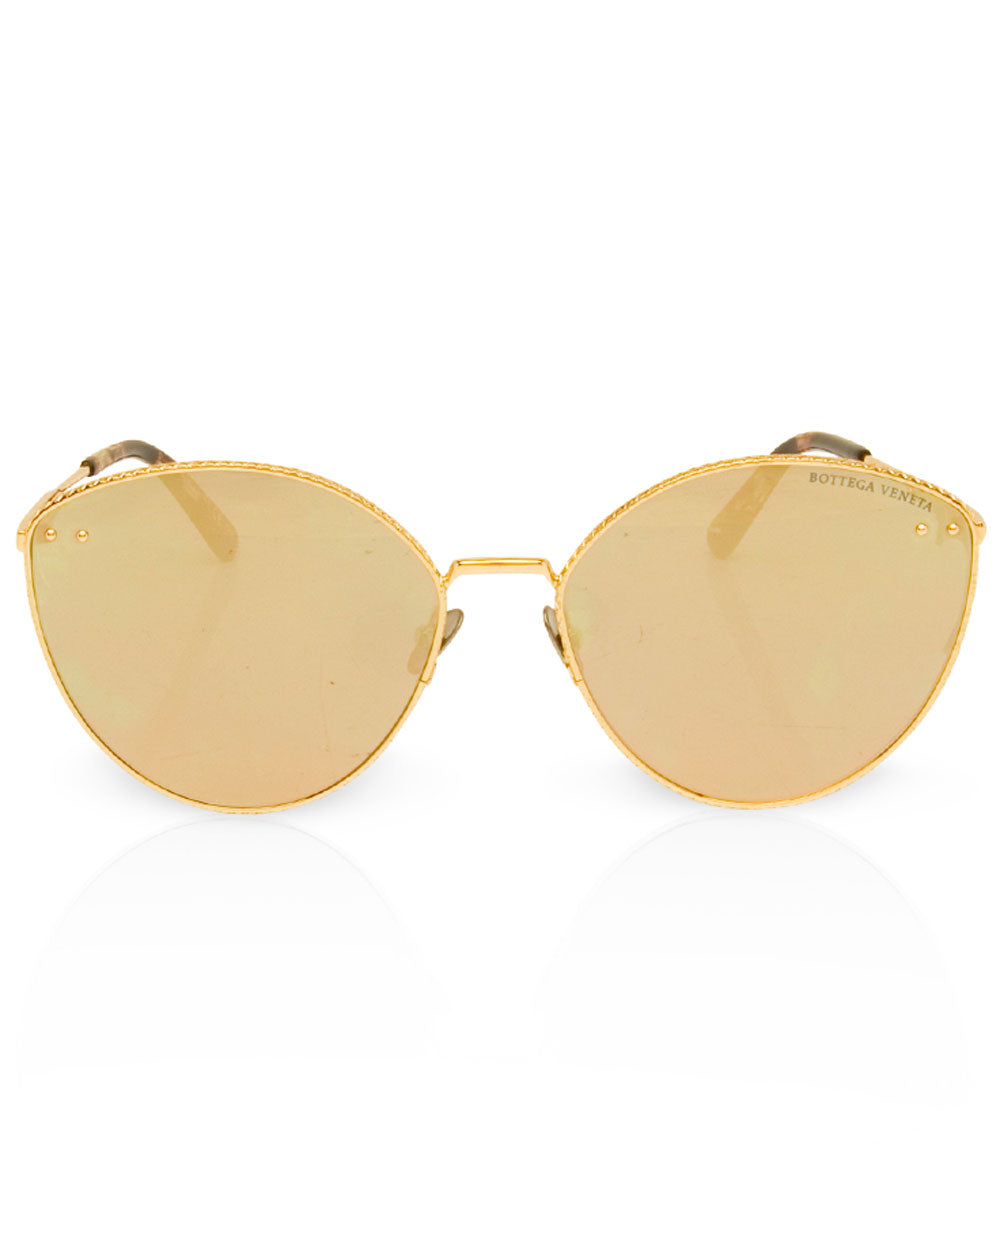 Metal Reflective Sunglasses in Gold